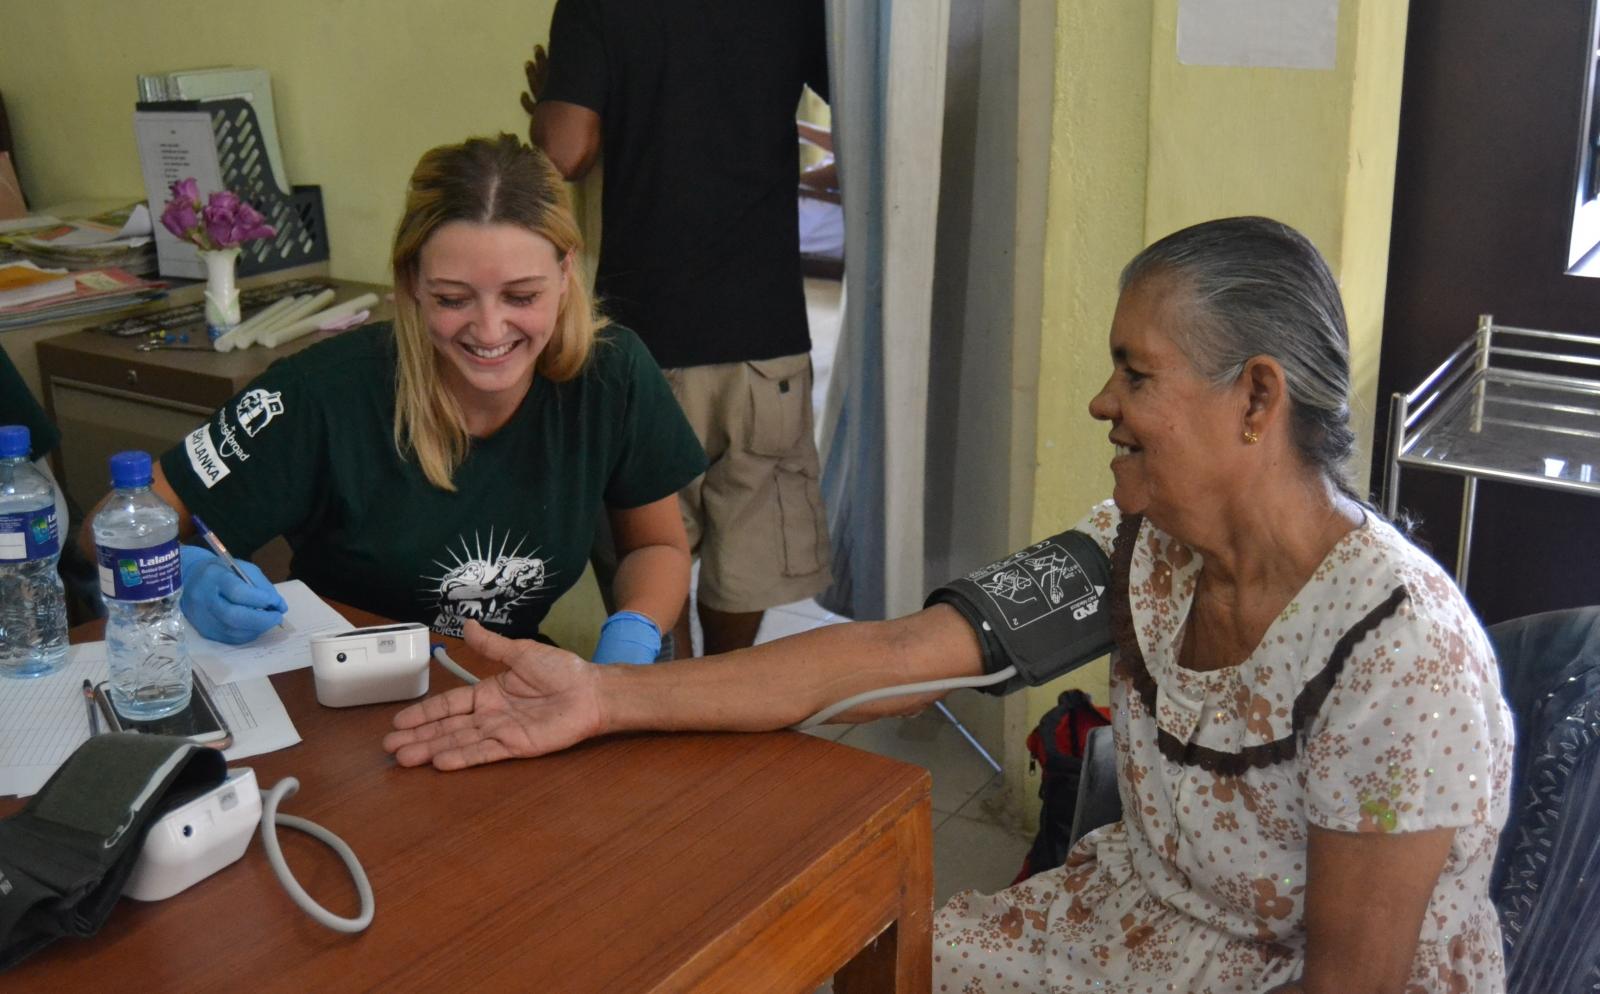 A volunteer on an alternative project to Doctors without Borders takes a patient's blood pressure reading